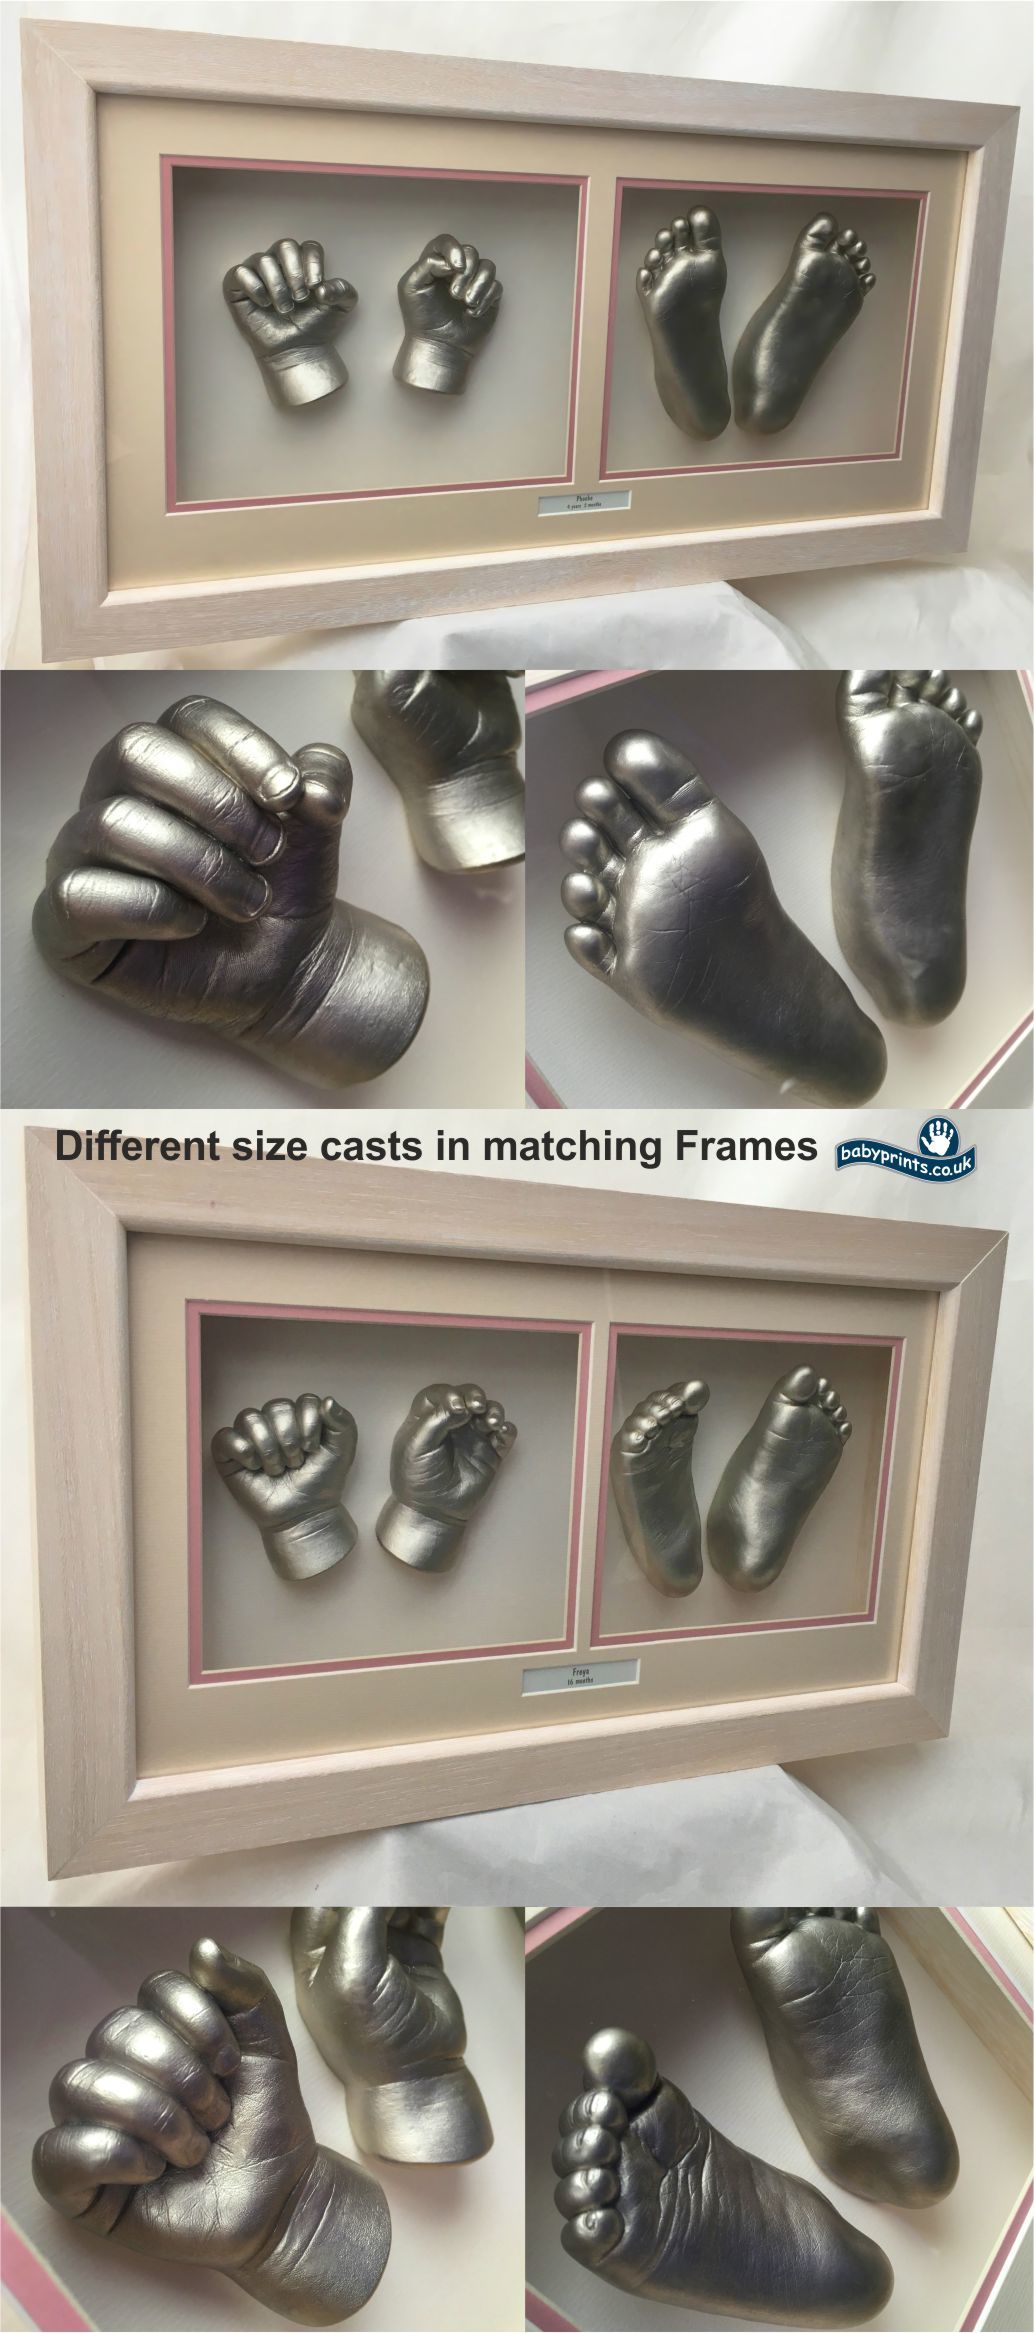 Different size casts in matching Frames